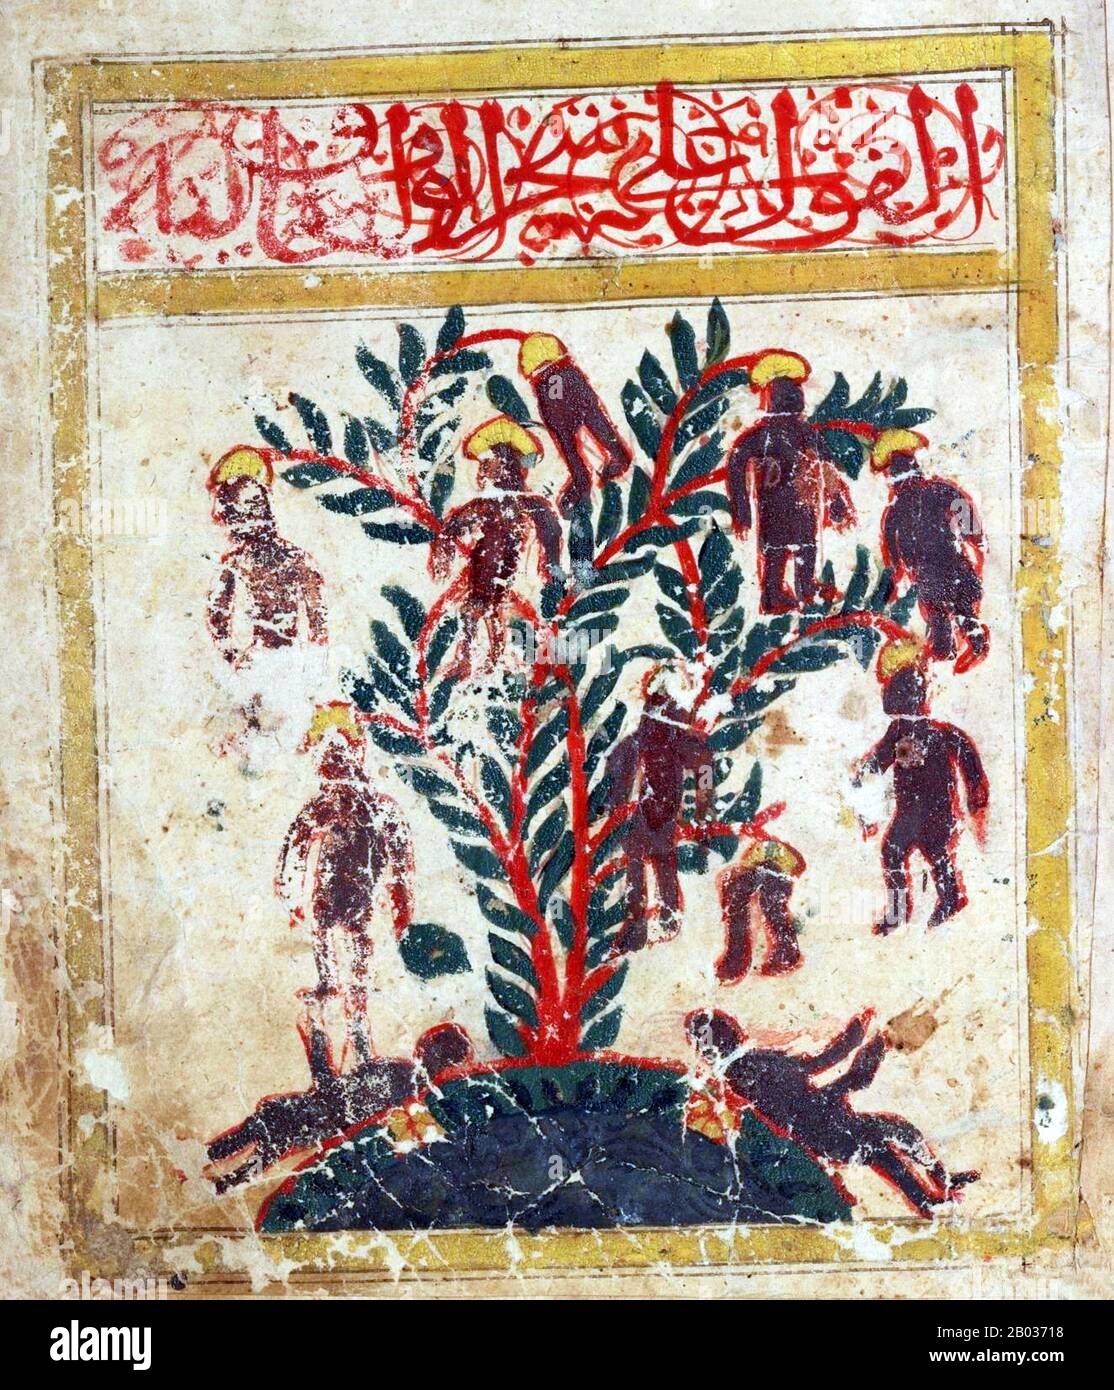 The Waqwaq is a giant tree that bears humanoid fruit in Indo-Persian lore. It is similar to the Japanese Jinmenju, another Human-Like tree.  The Waqwaq is a Persian Oracular Tree, originating from India, whose branches or fruits become heads of men, women or monstrous animals (depending on version) all screaming 'Waq-Waq'.  In the Islamic world, there is a legend about a fabulous tree on the island of Waq Waq, which has fruit in the form of human figures, or heads that talk and make prophesies. Alexander the Great is said to have encountered one such talking tree with human fruit. Stock Photo